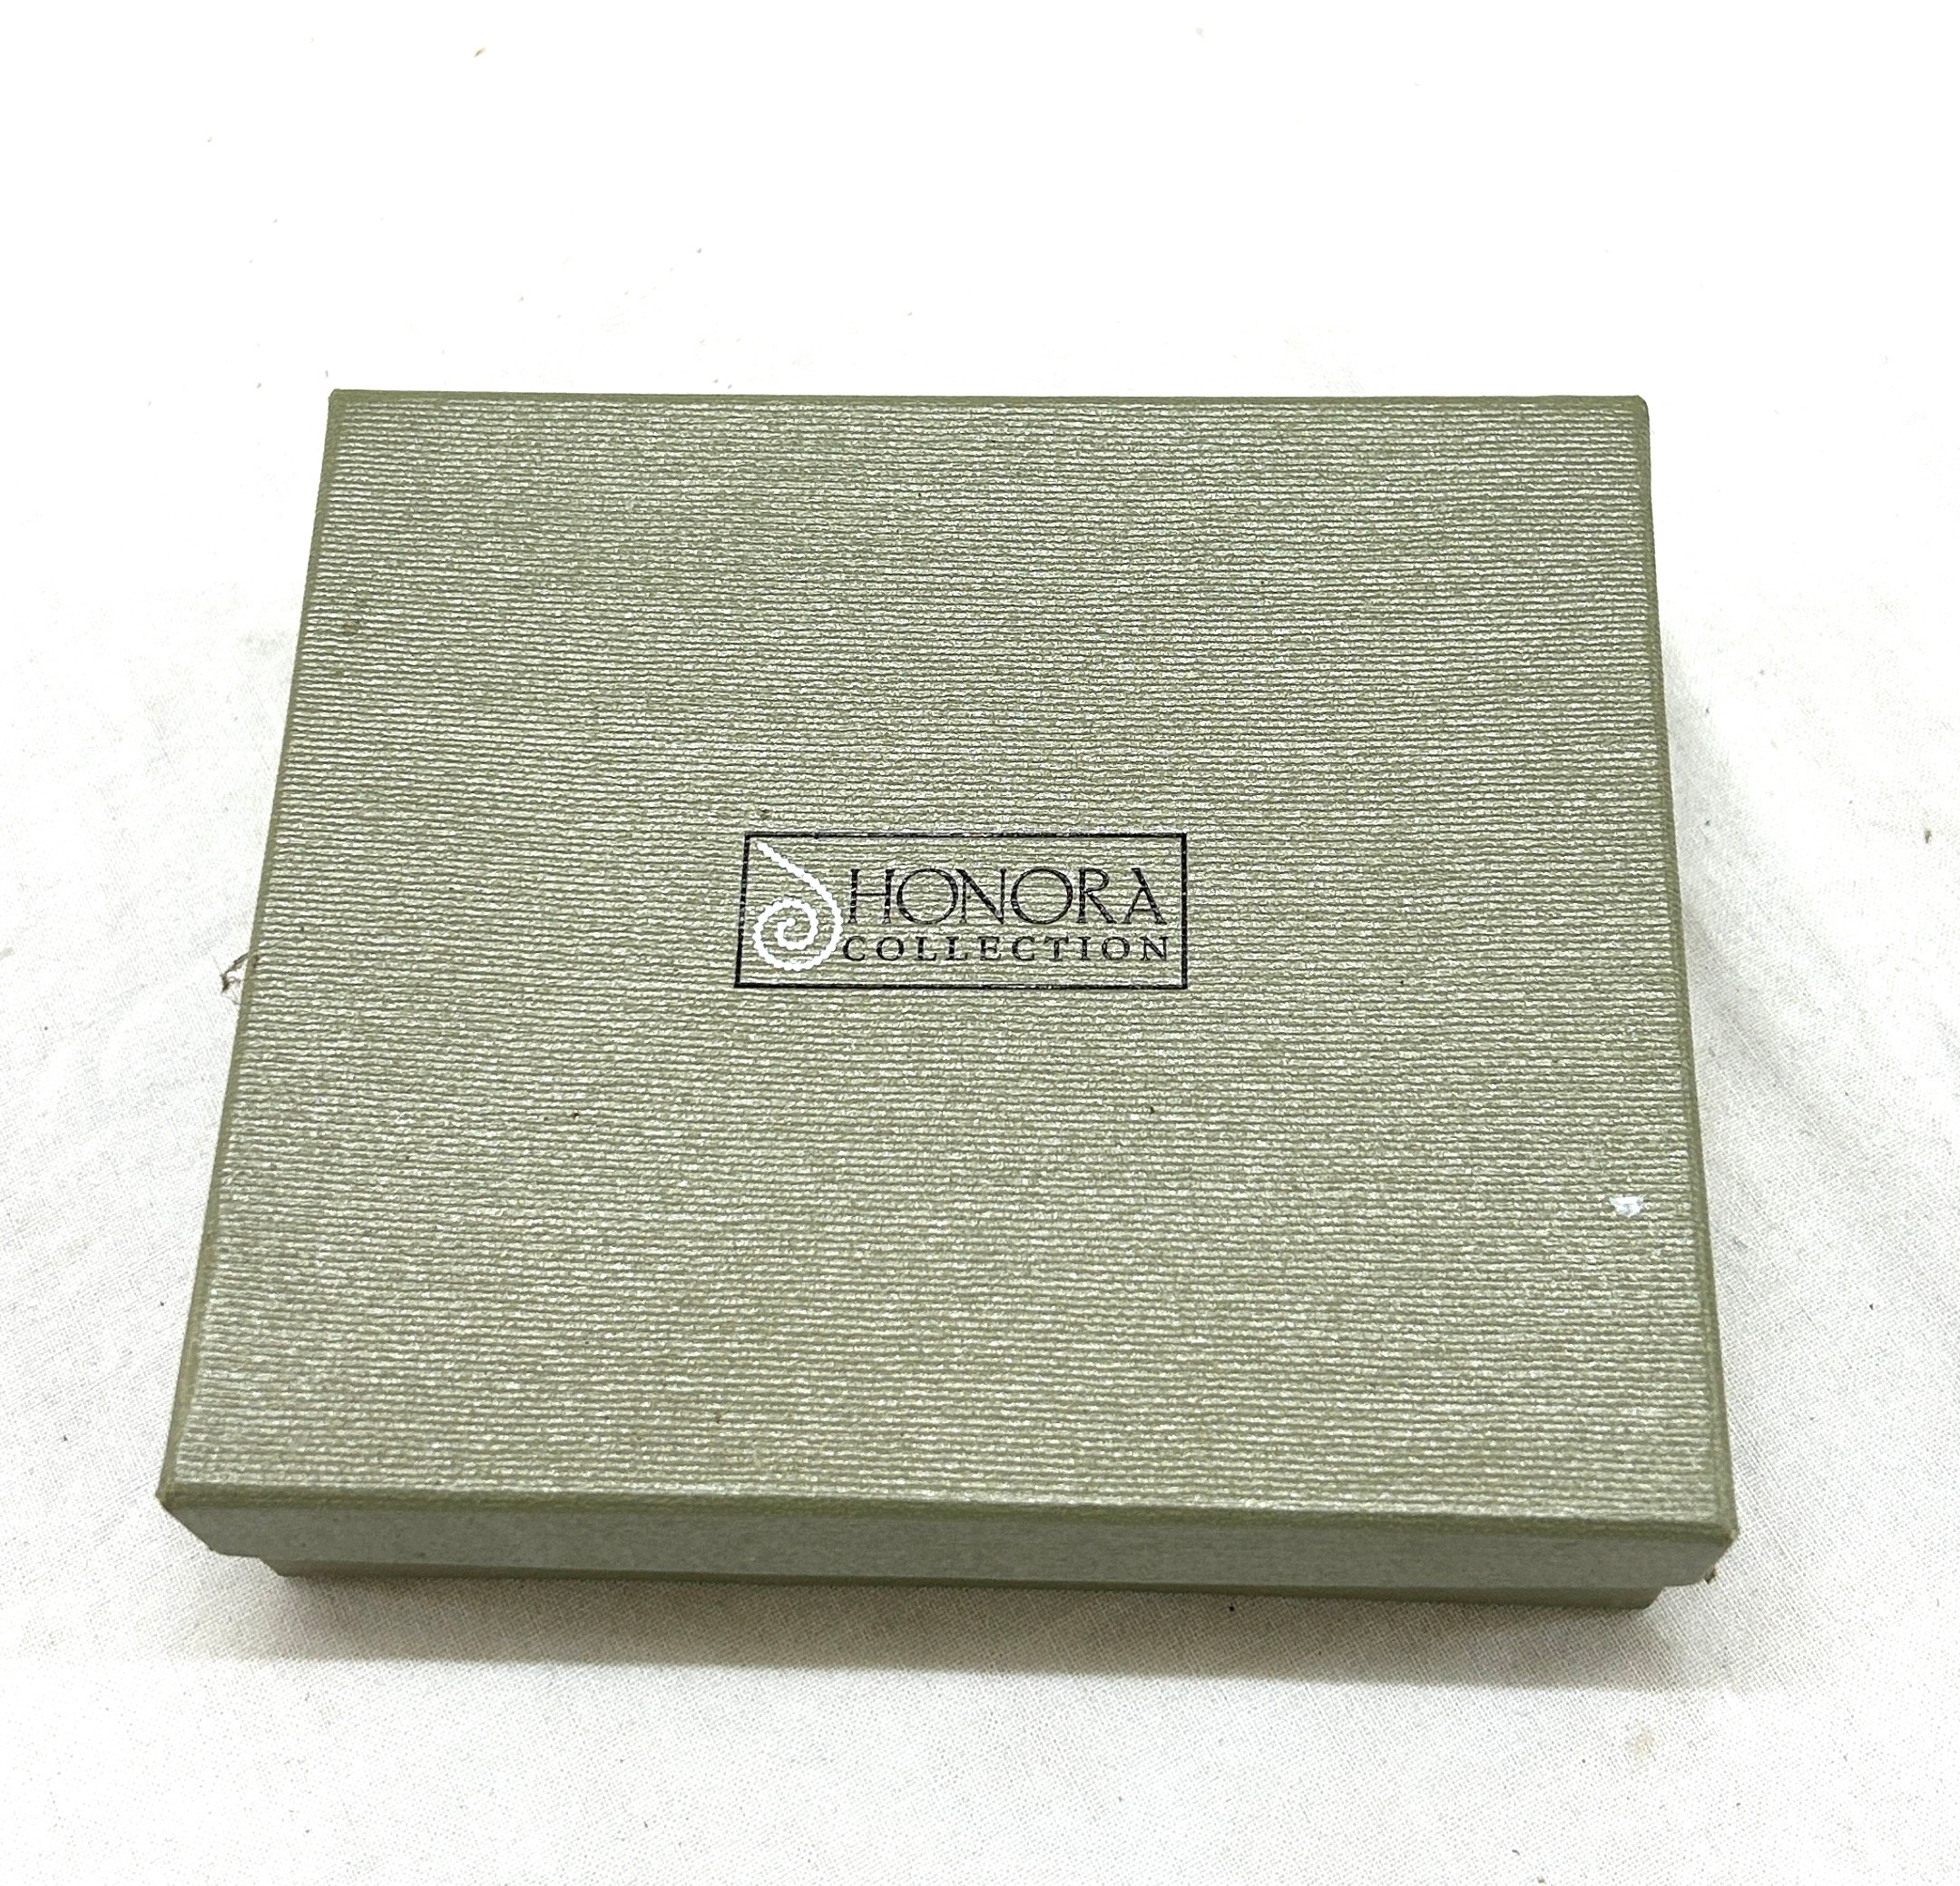 Boxed Honora Pearl necklace with bag and coa - Image 2 of 2